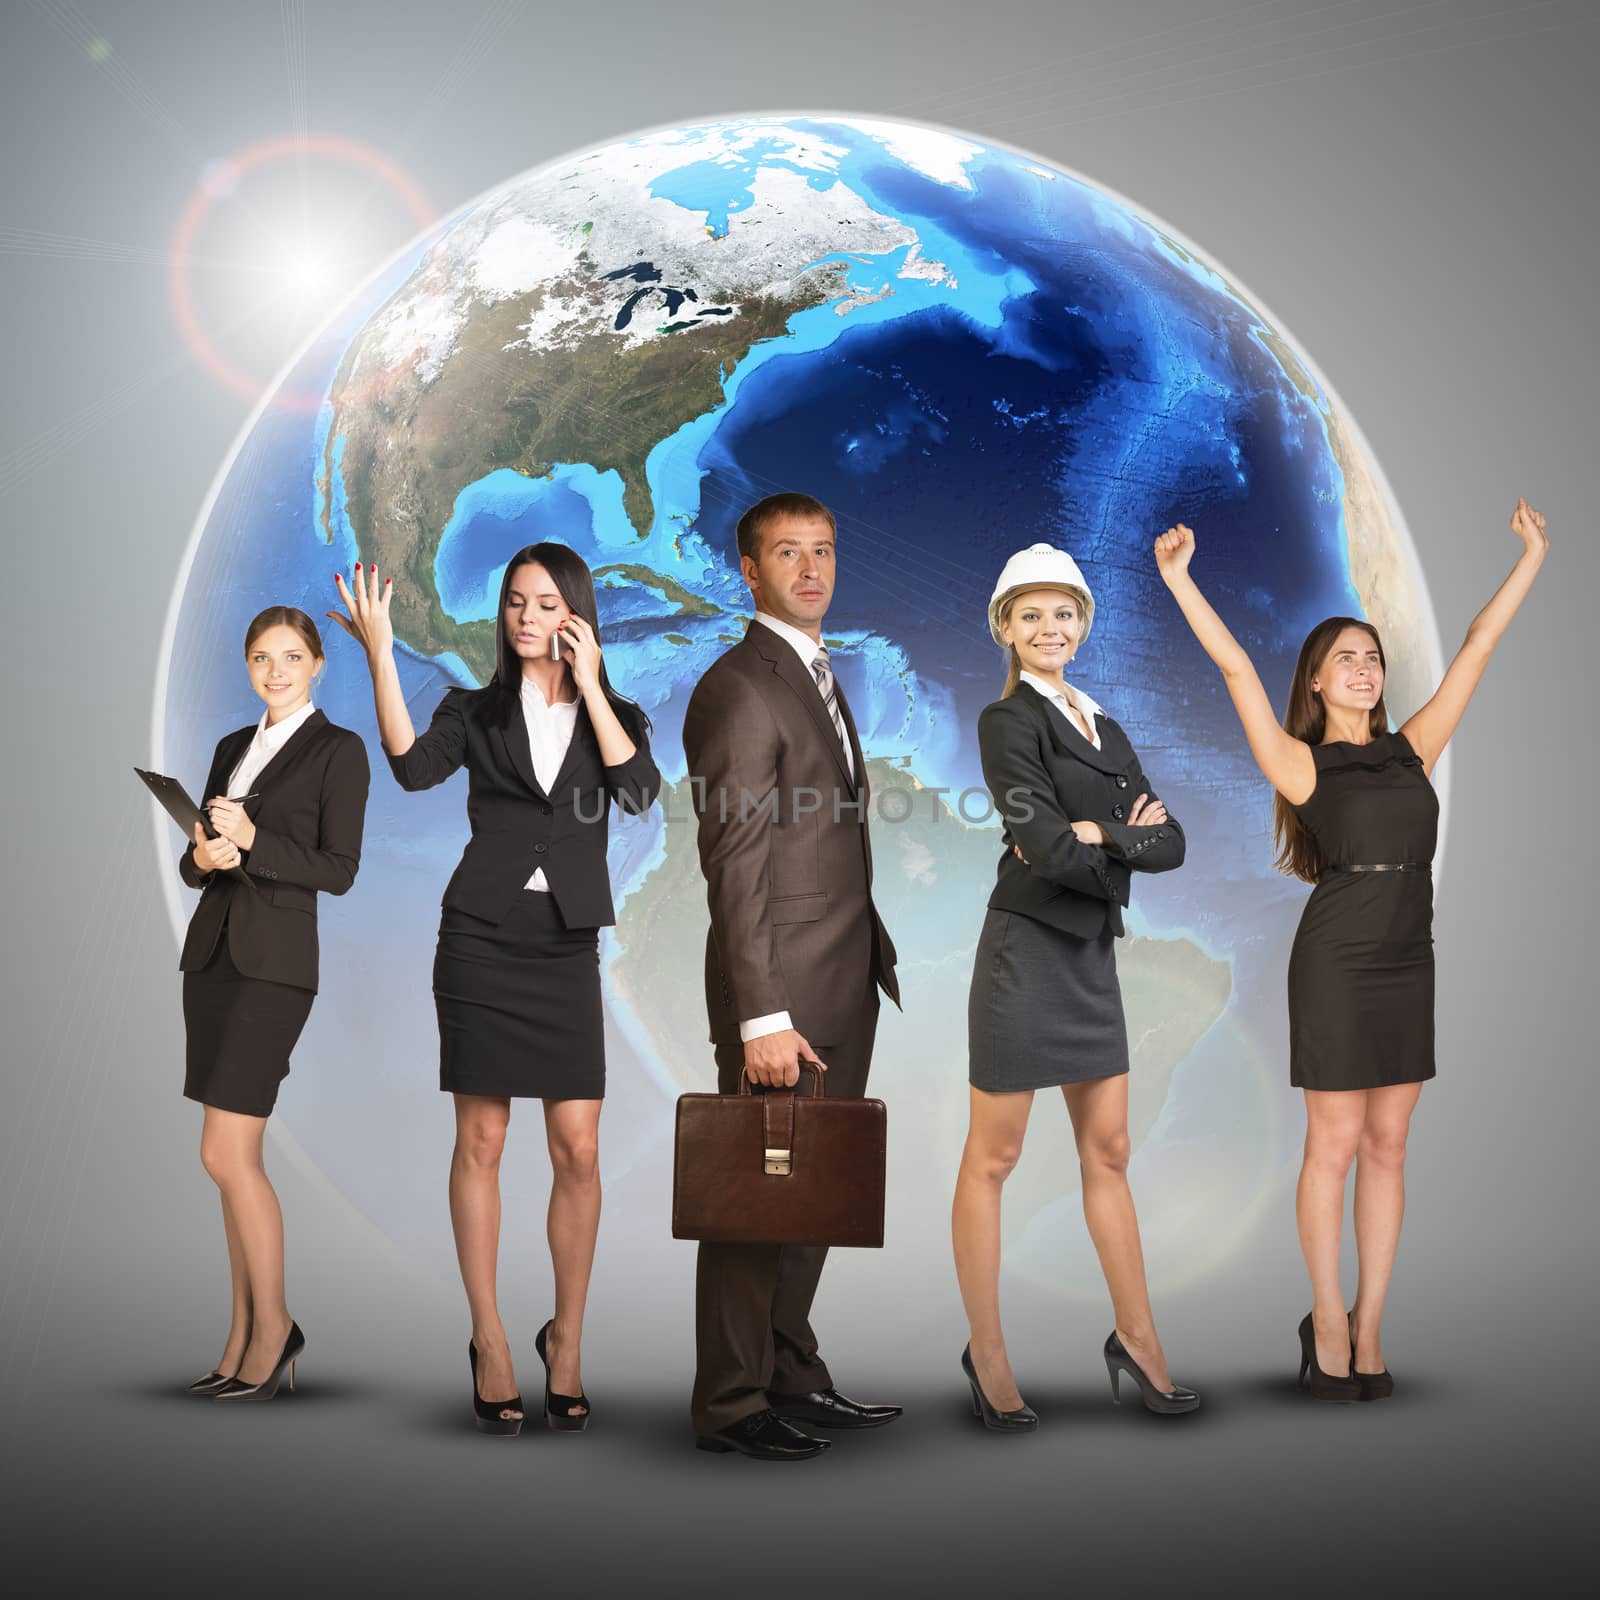 Business women and men in suits, smiling. Against background of globe earth by cherezoff